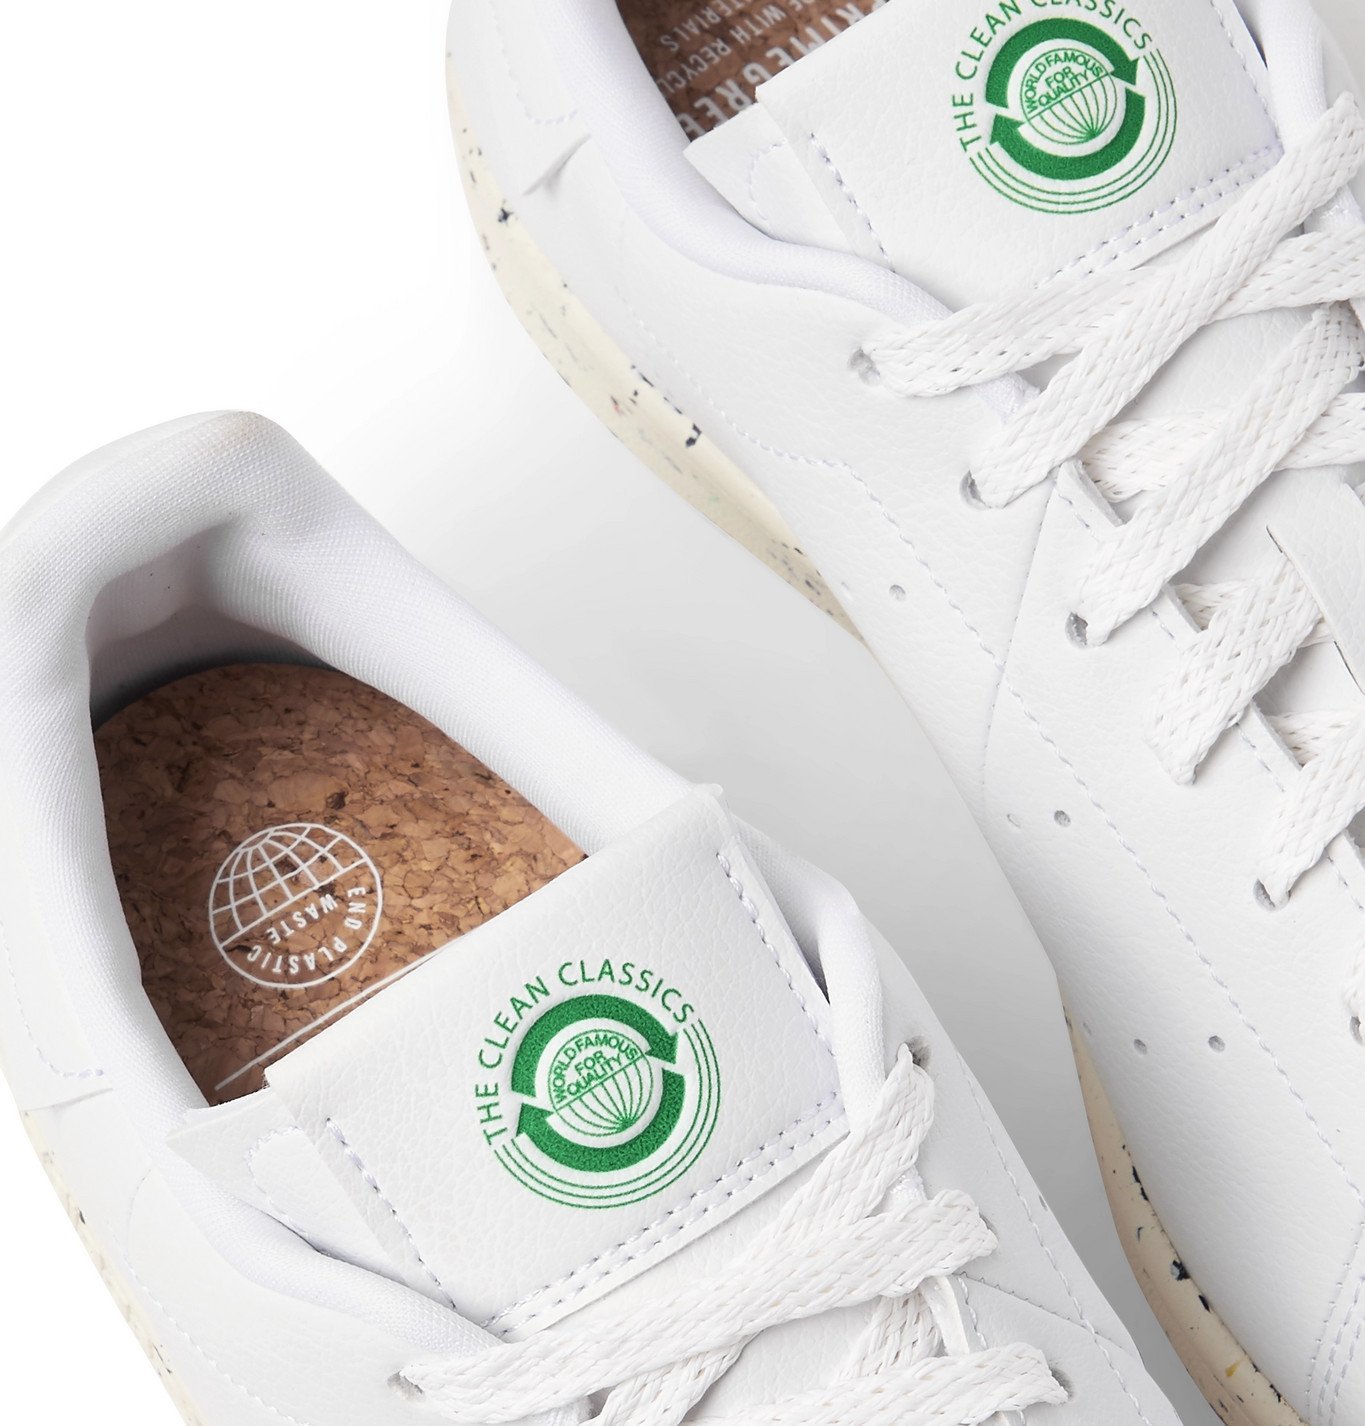 adidas Originals - Stan Smith Recycled Leather Sneakers - White adidas ...